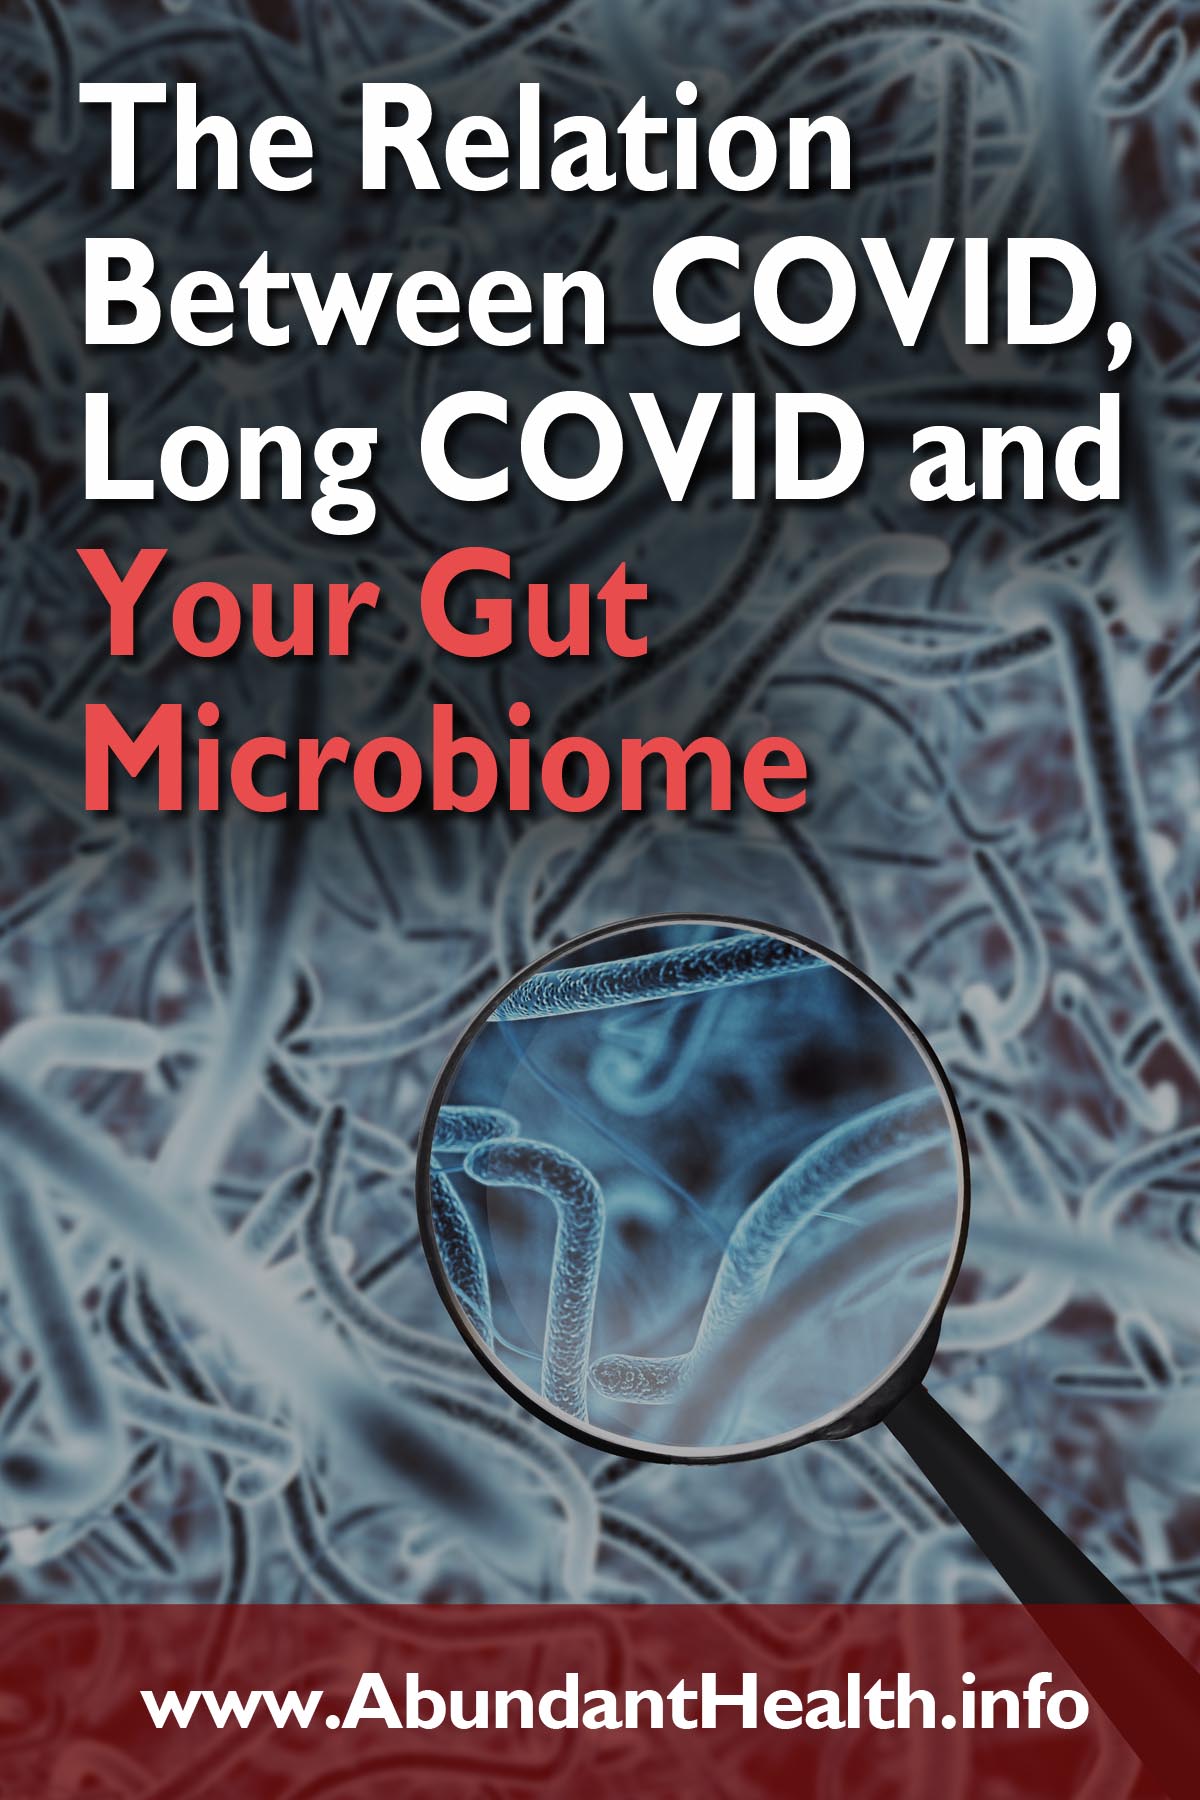 The Relation Between COVID, Long COVID and Your Gut Microbiome